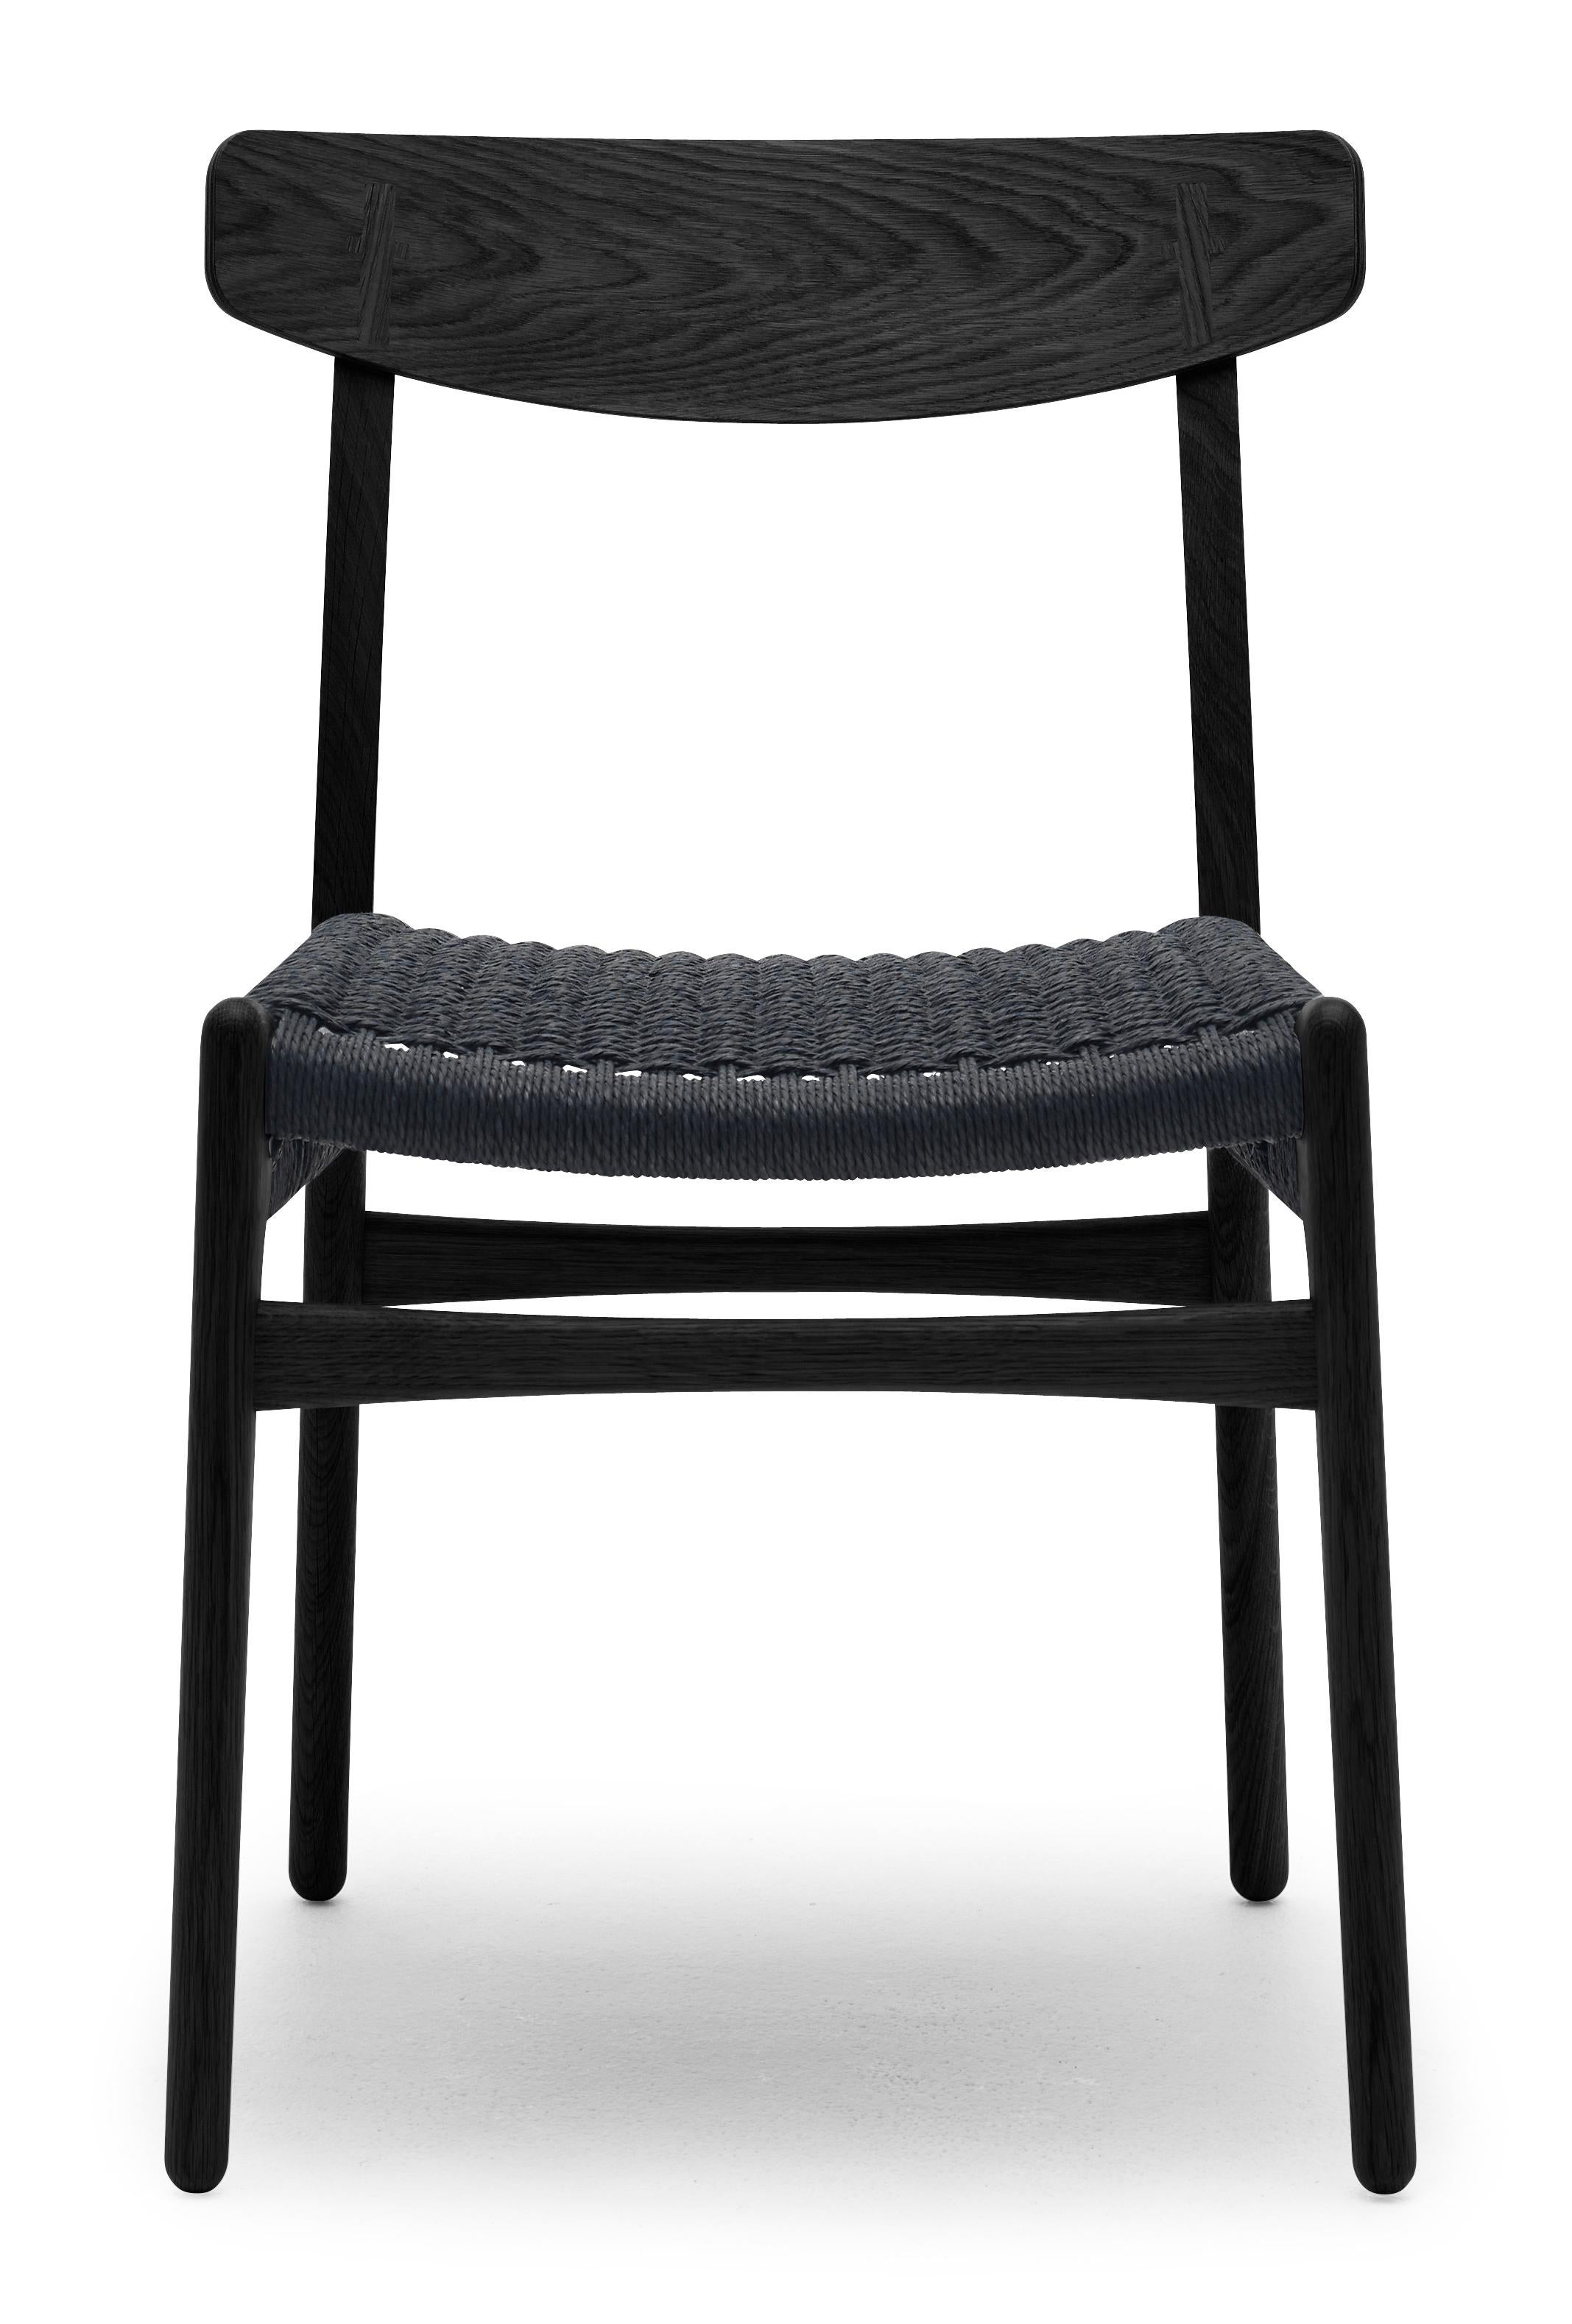 Black (Oak Painted blacks9000-N) CH23 Dining Chair in Wood Finishes with Black Papercord Seat by Hans J. Wegner